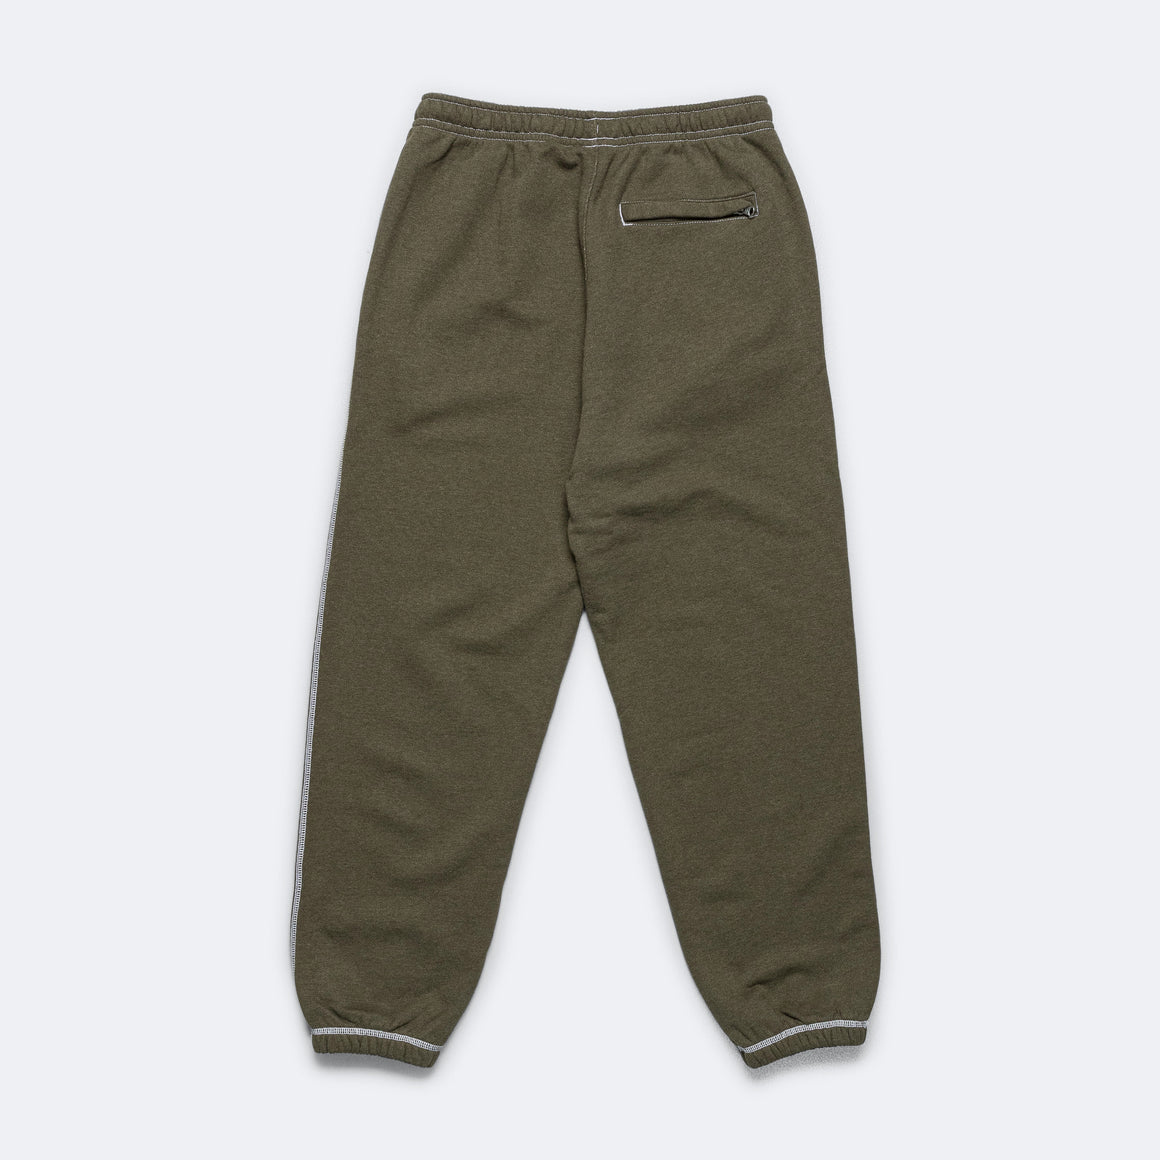 Converse - Rain or Shine Pant x Patta - Utility Green Heather - UP THERE